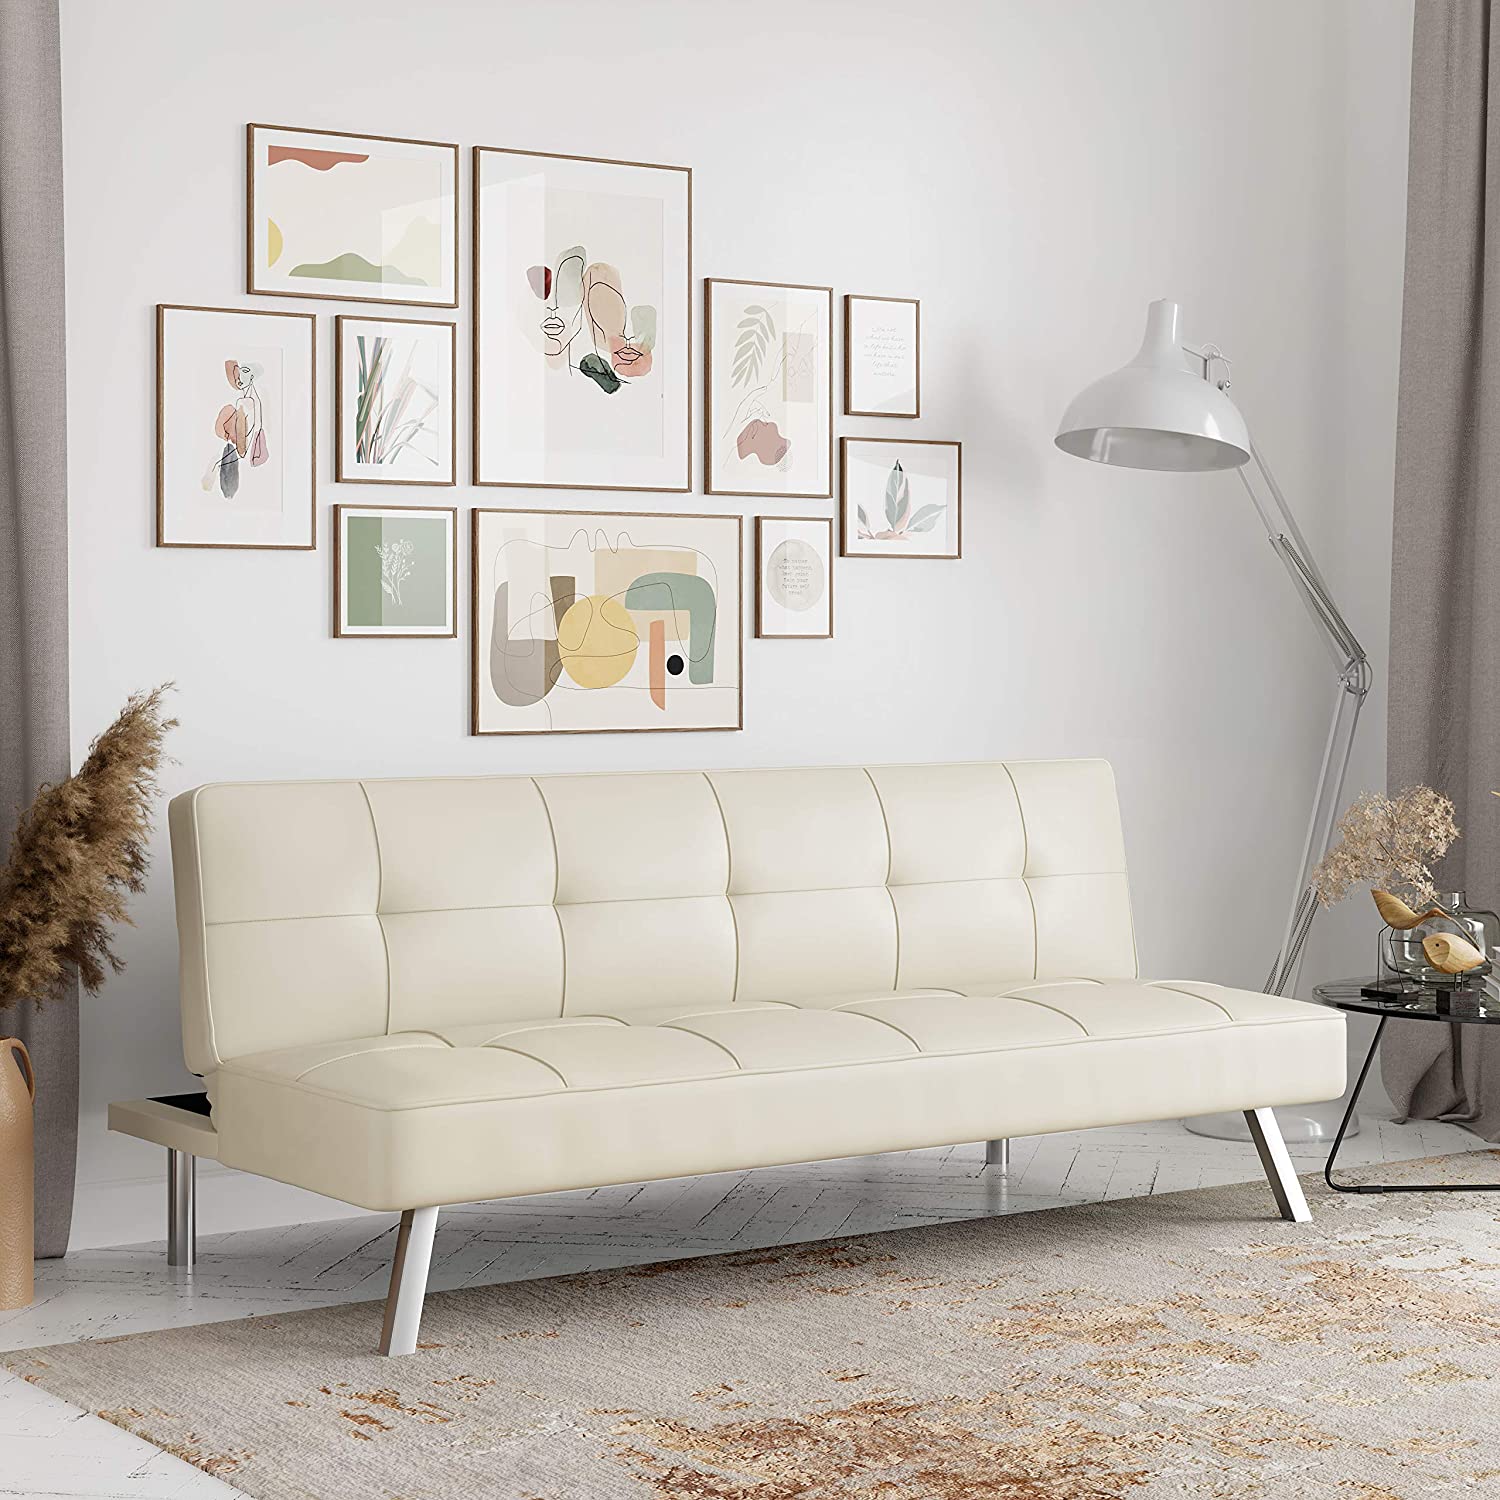 Best Couches for rentals